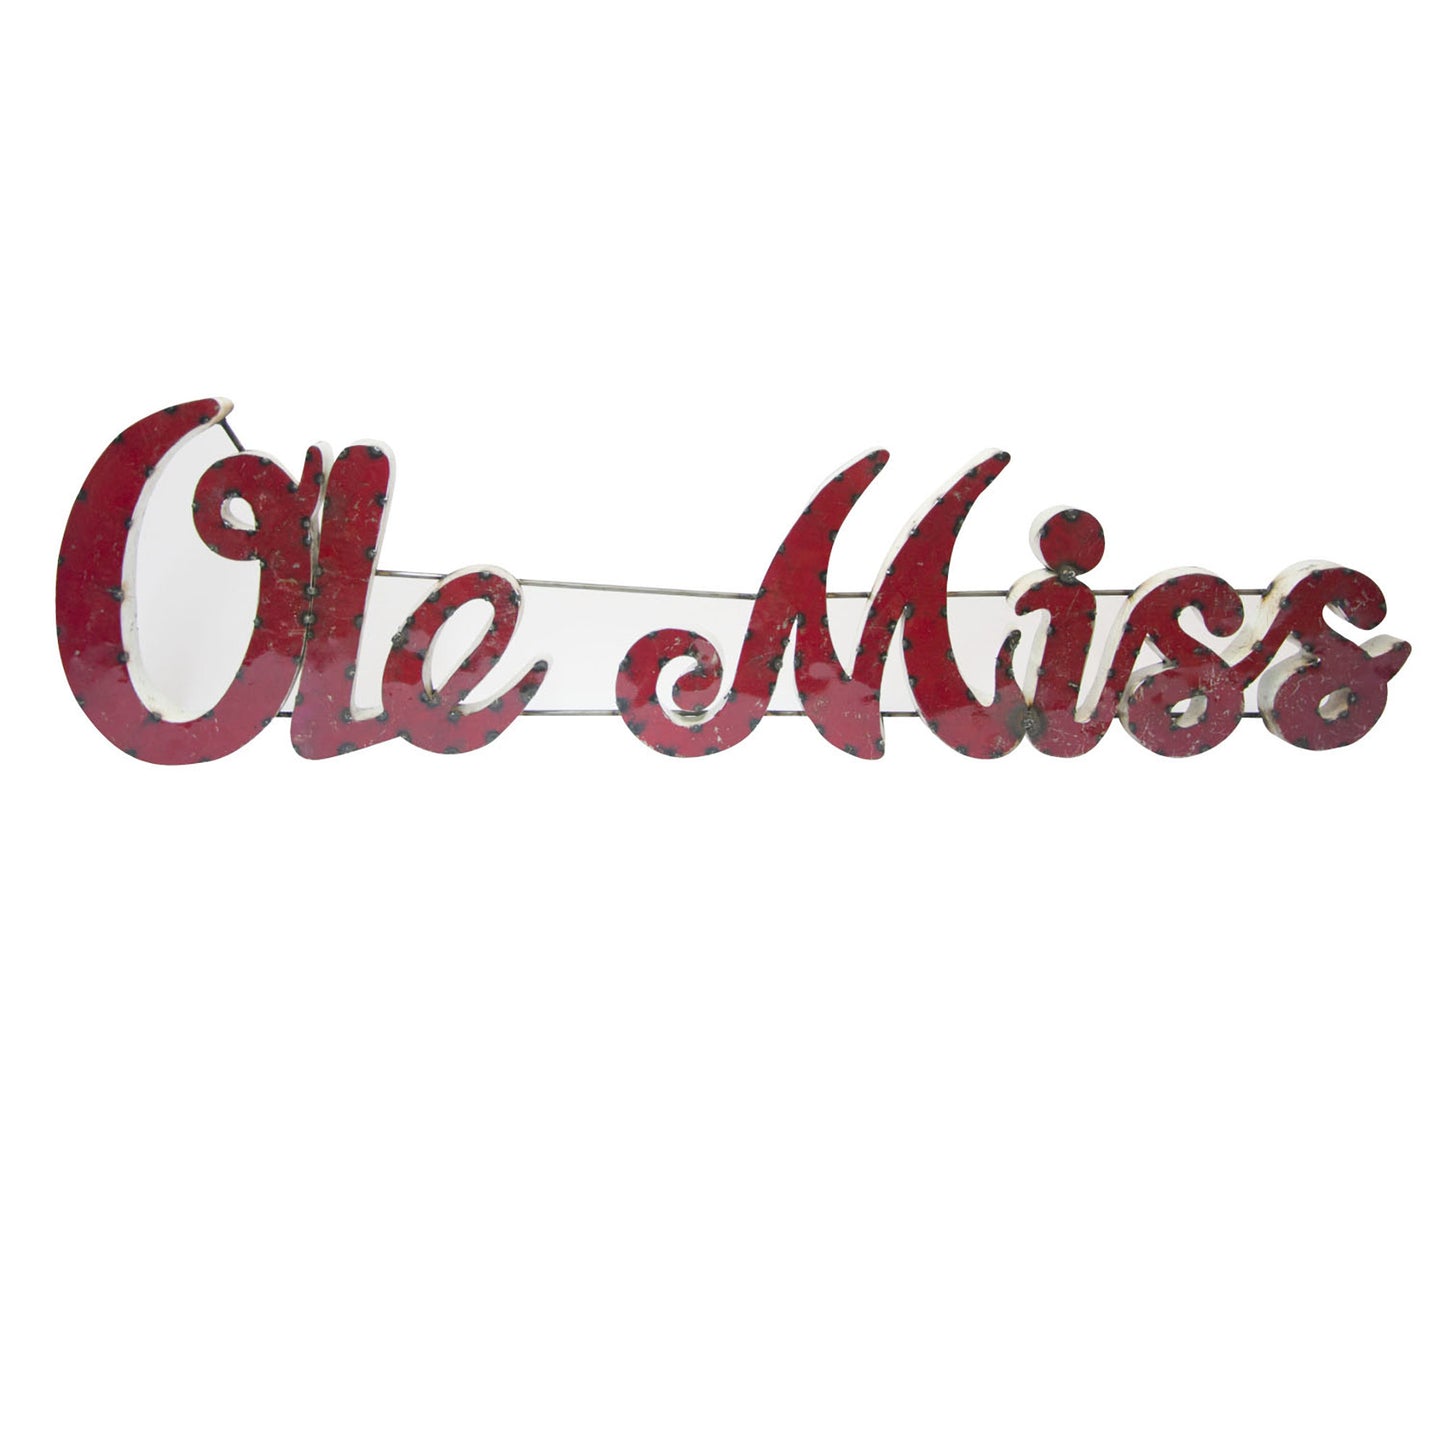 University of Mississippi "Ole Miss" Recycled Metal Wall Decor